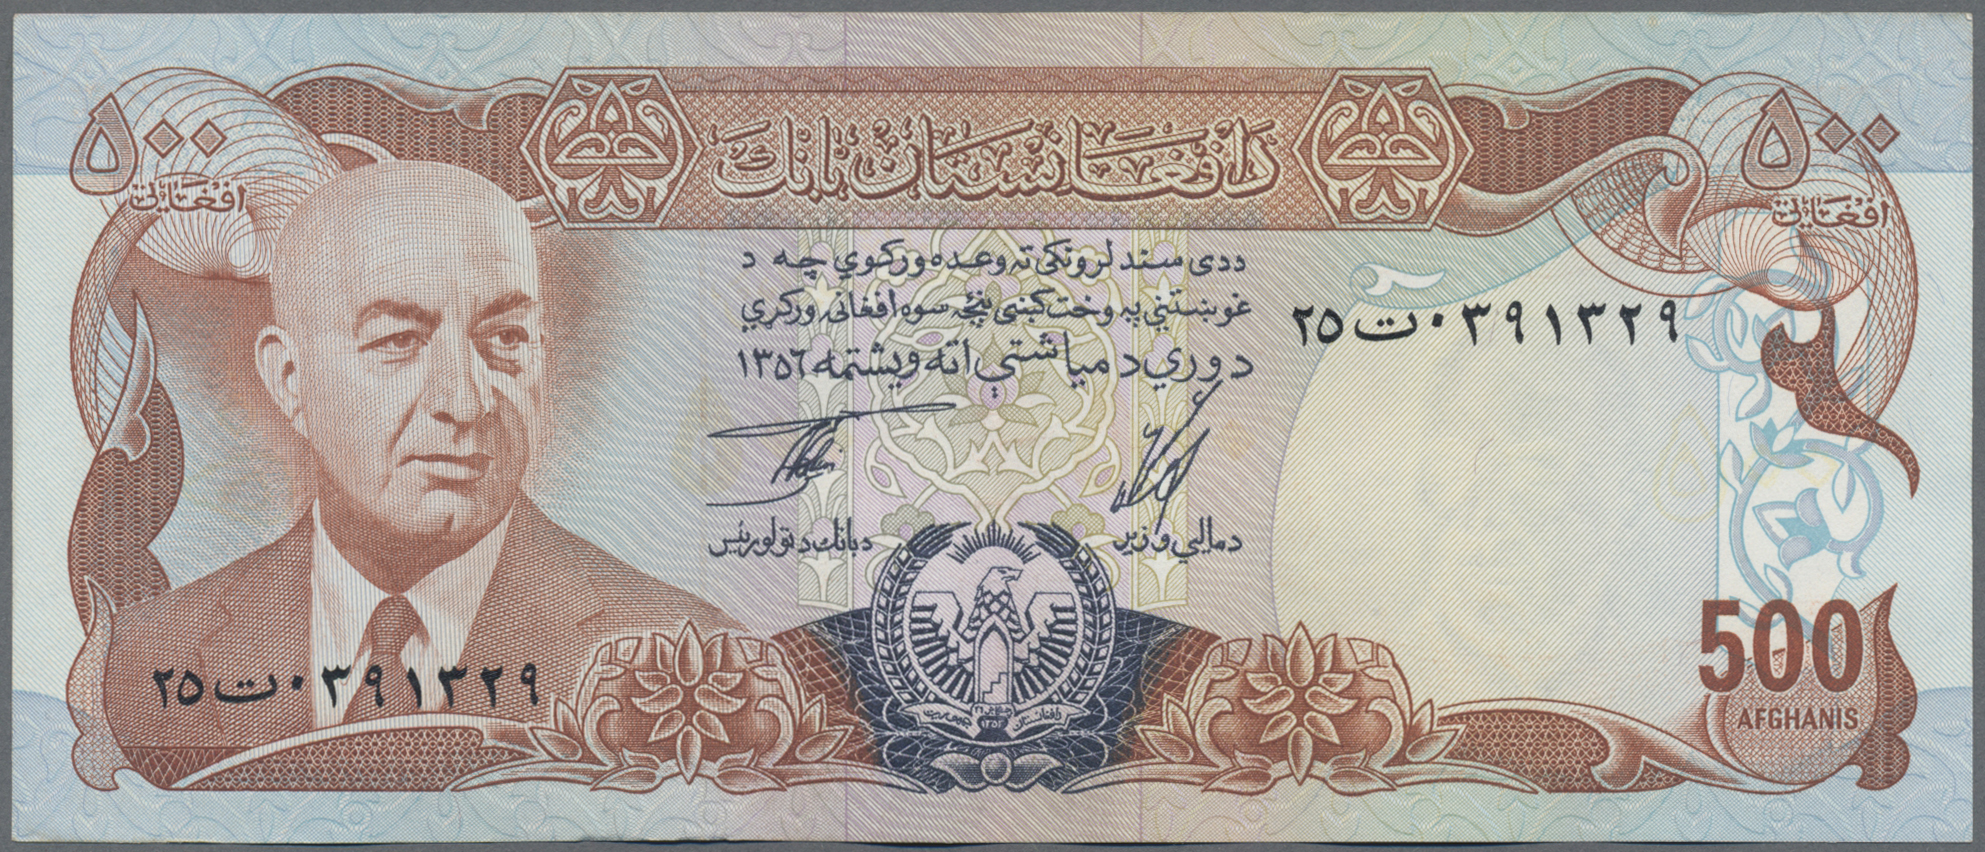 Lot 501 - Afghanistan | Banknoten  -  Auktionshaus Christoph Gärtner GmbH & Co. KG 52nd Auction - Day 1